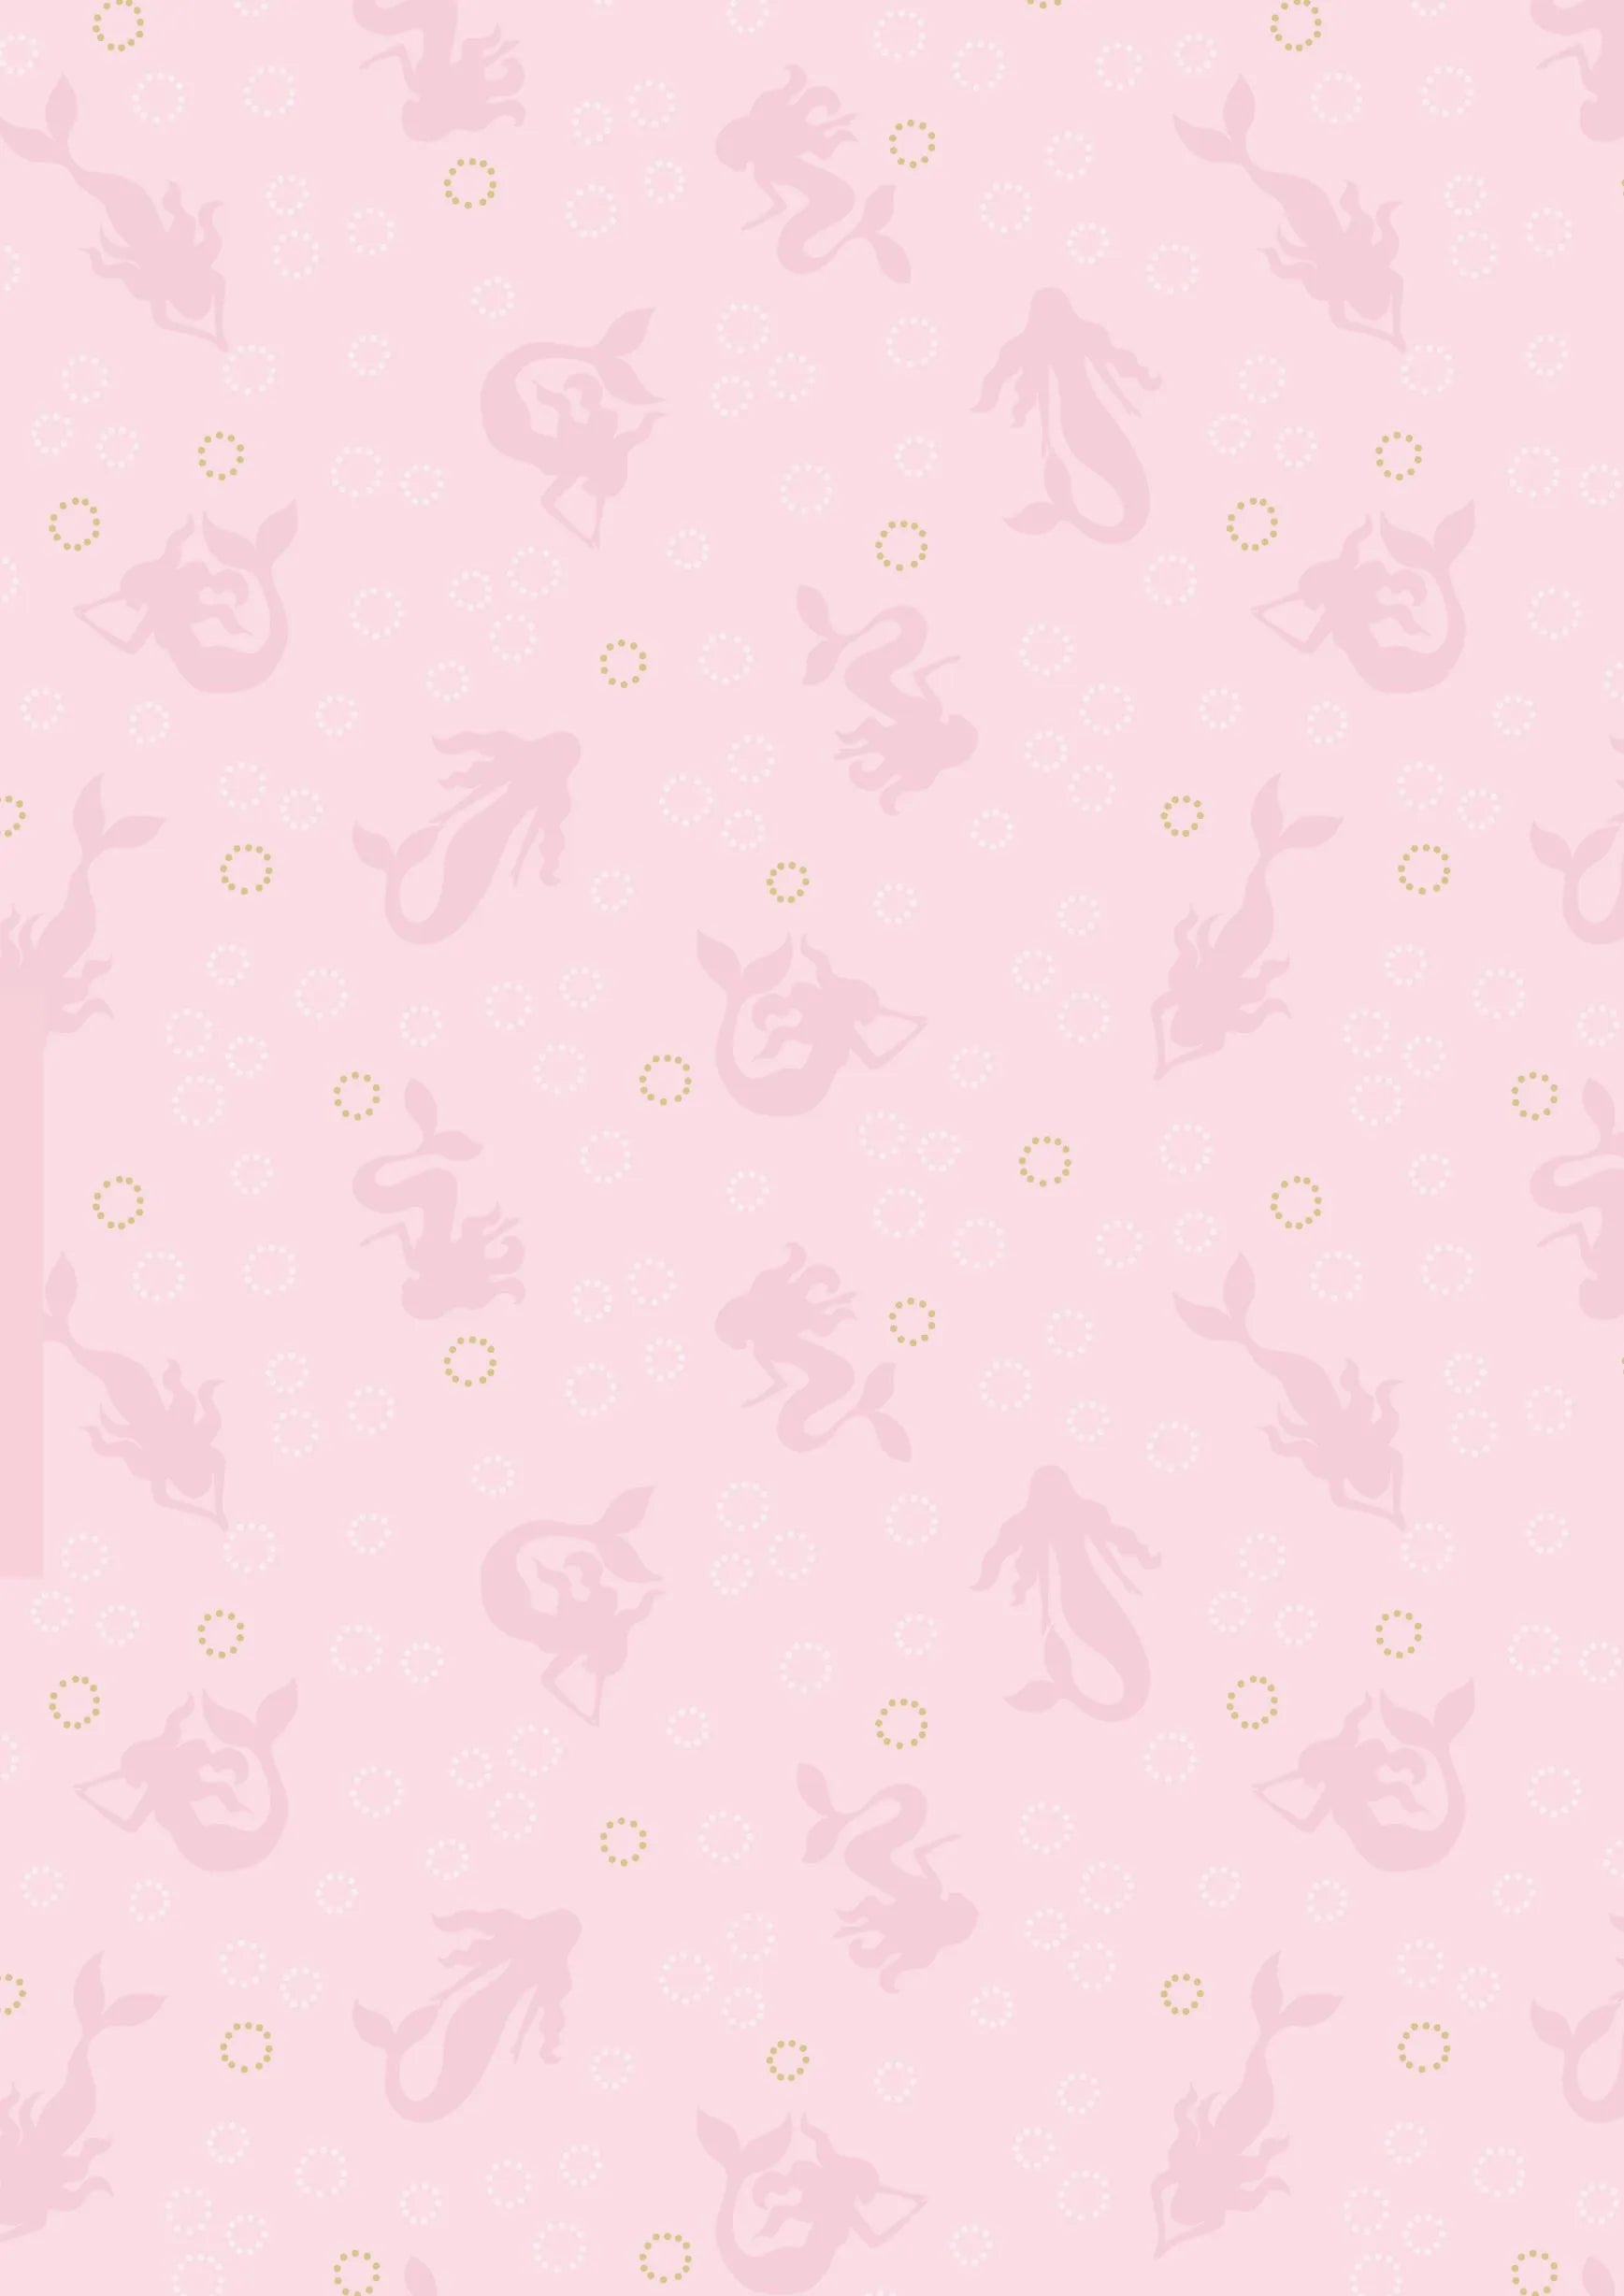 Mermaids on pink with gold metallic bubbles on cotton fabric - 'Moontide' Lewis & Irene